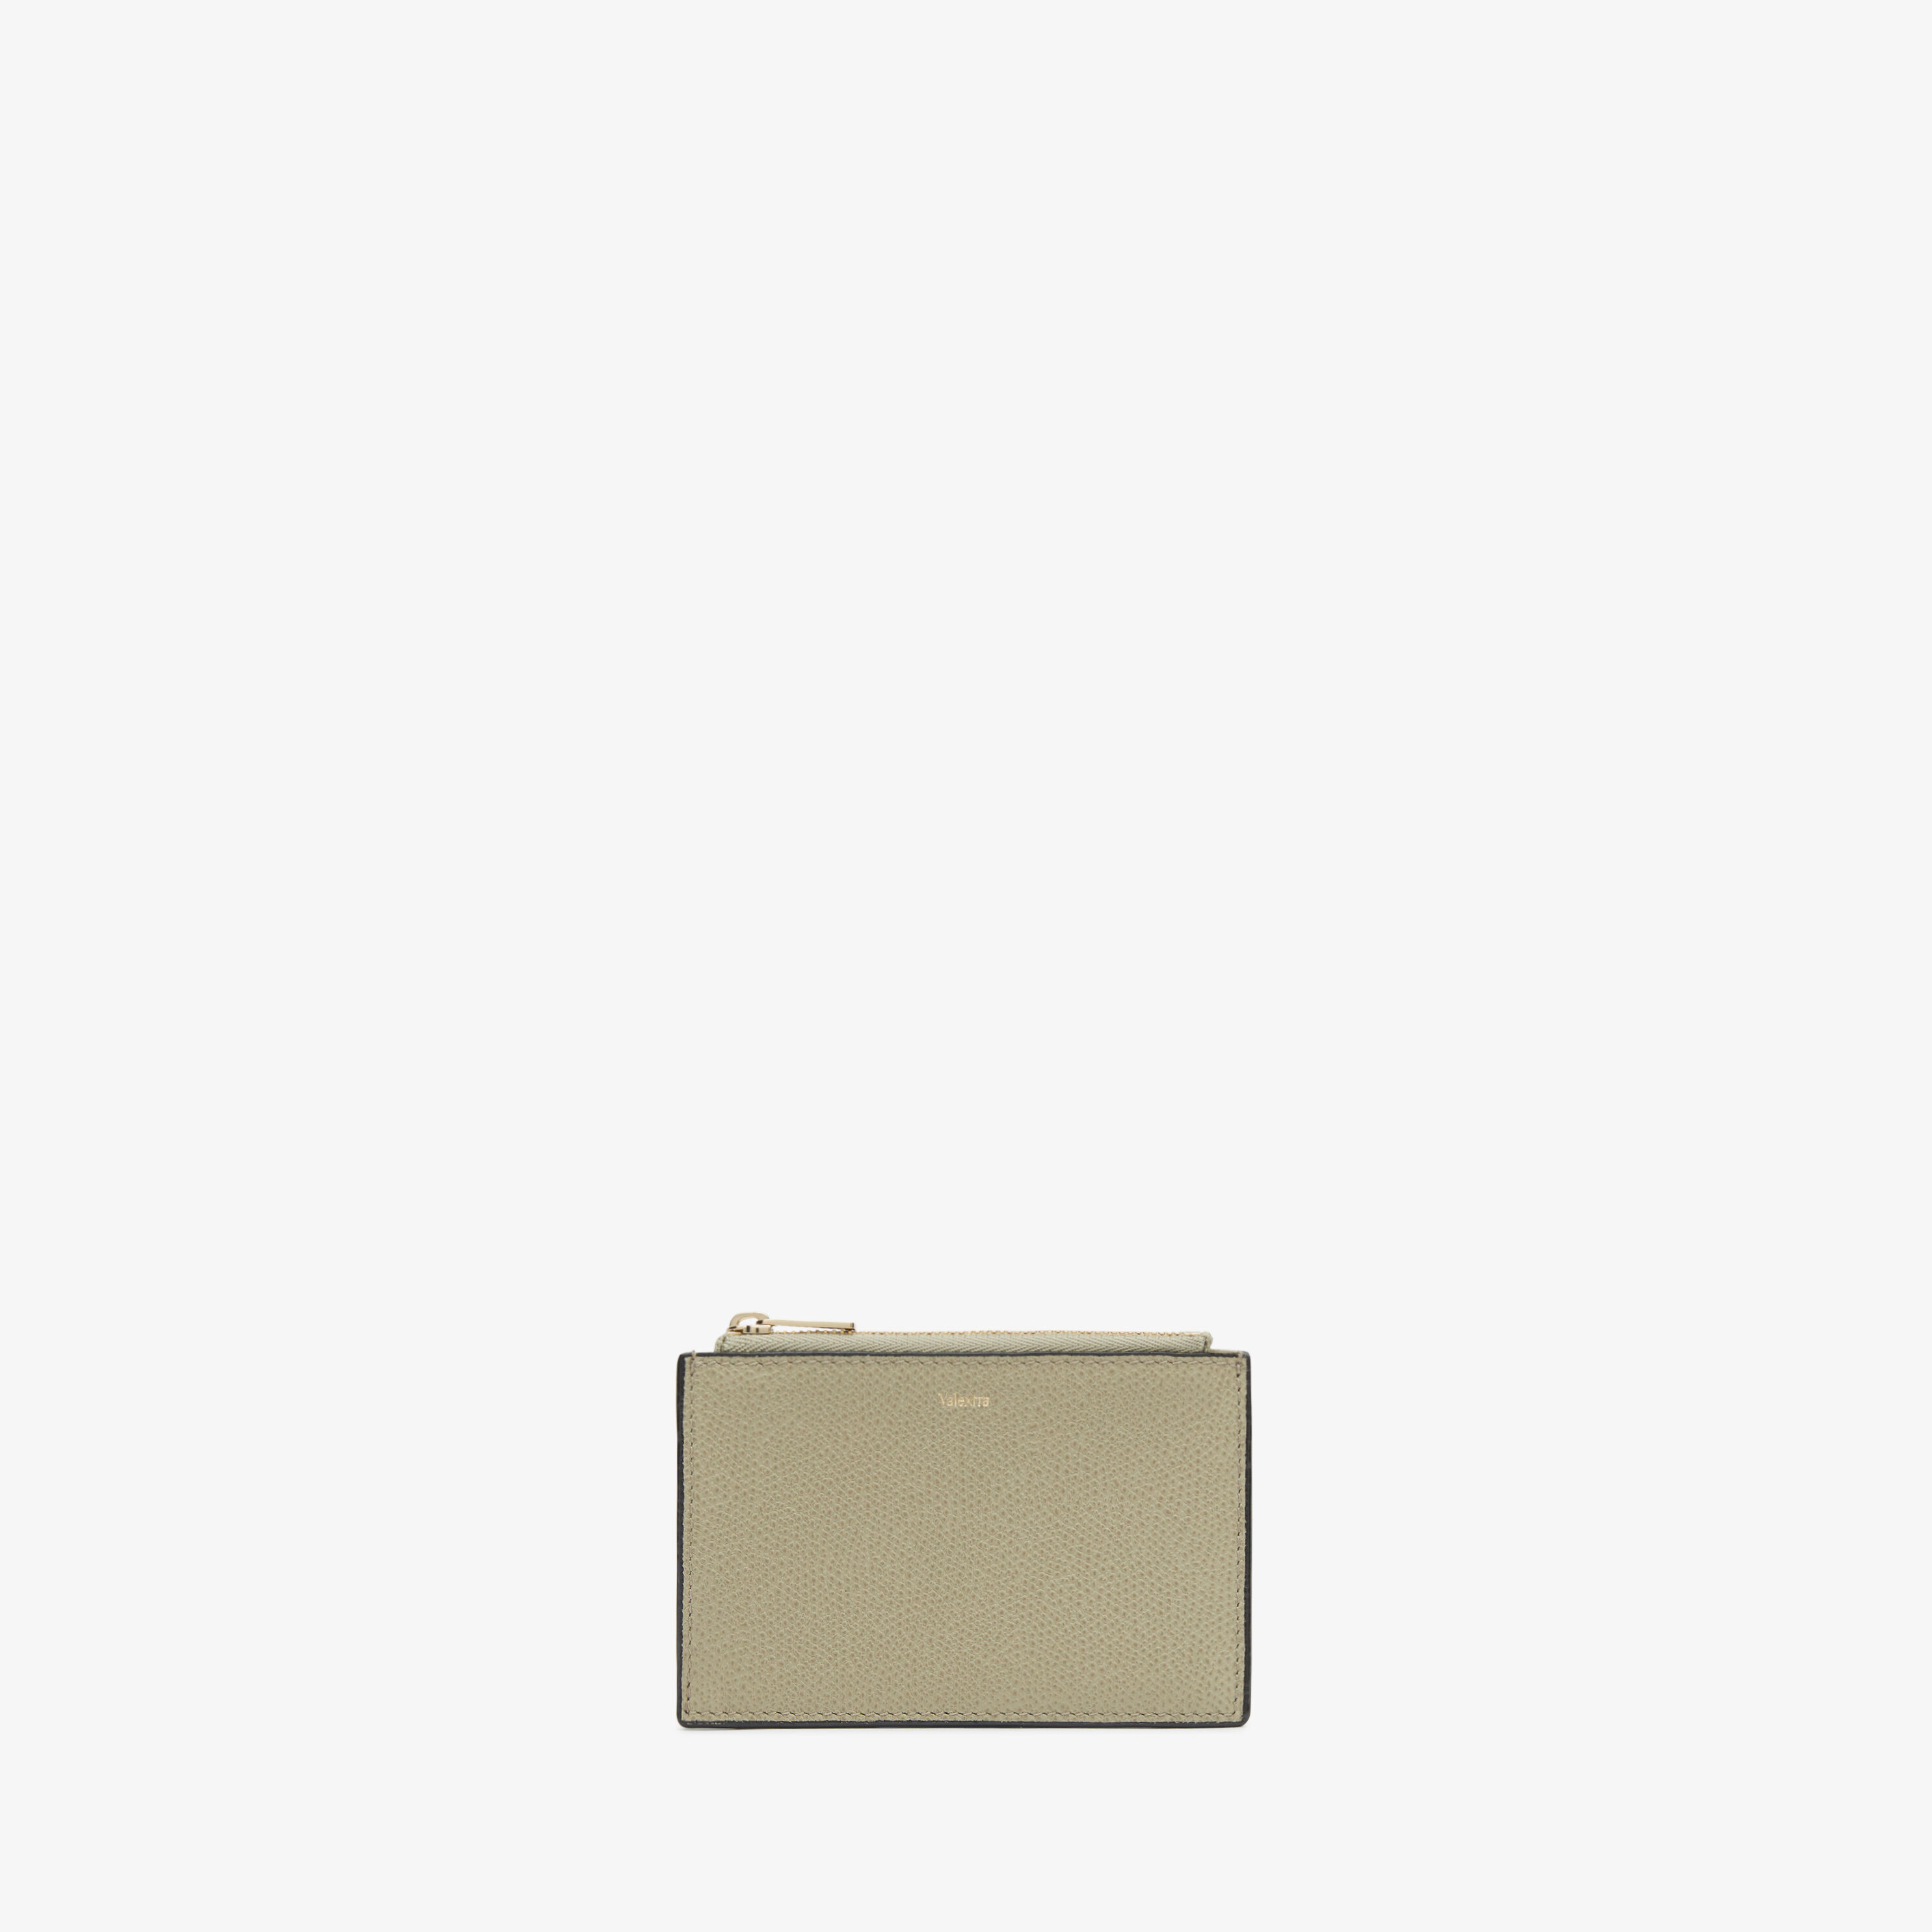 Women & Men's wallets, card cases, small leather goods | Valextra